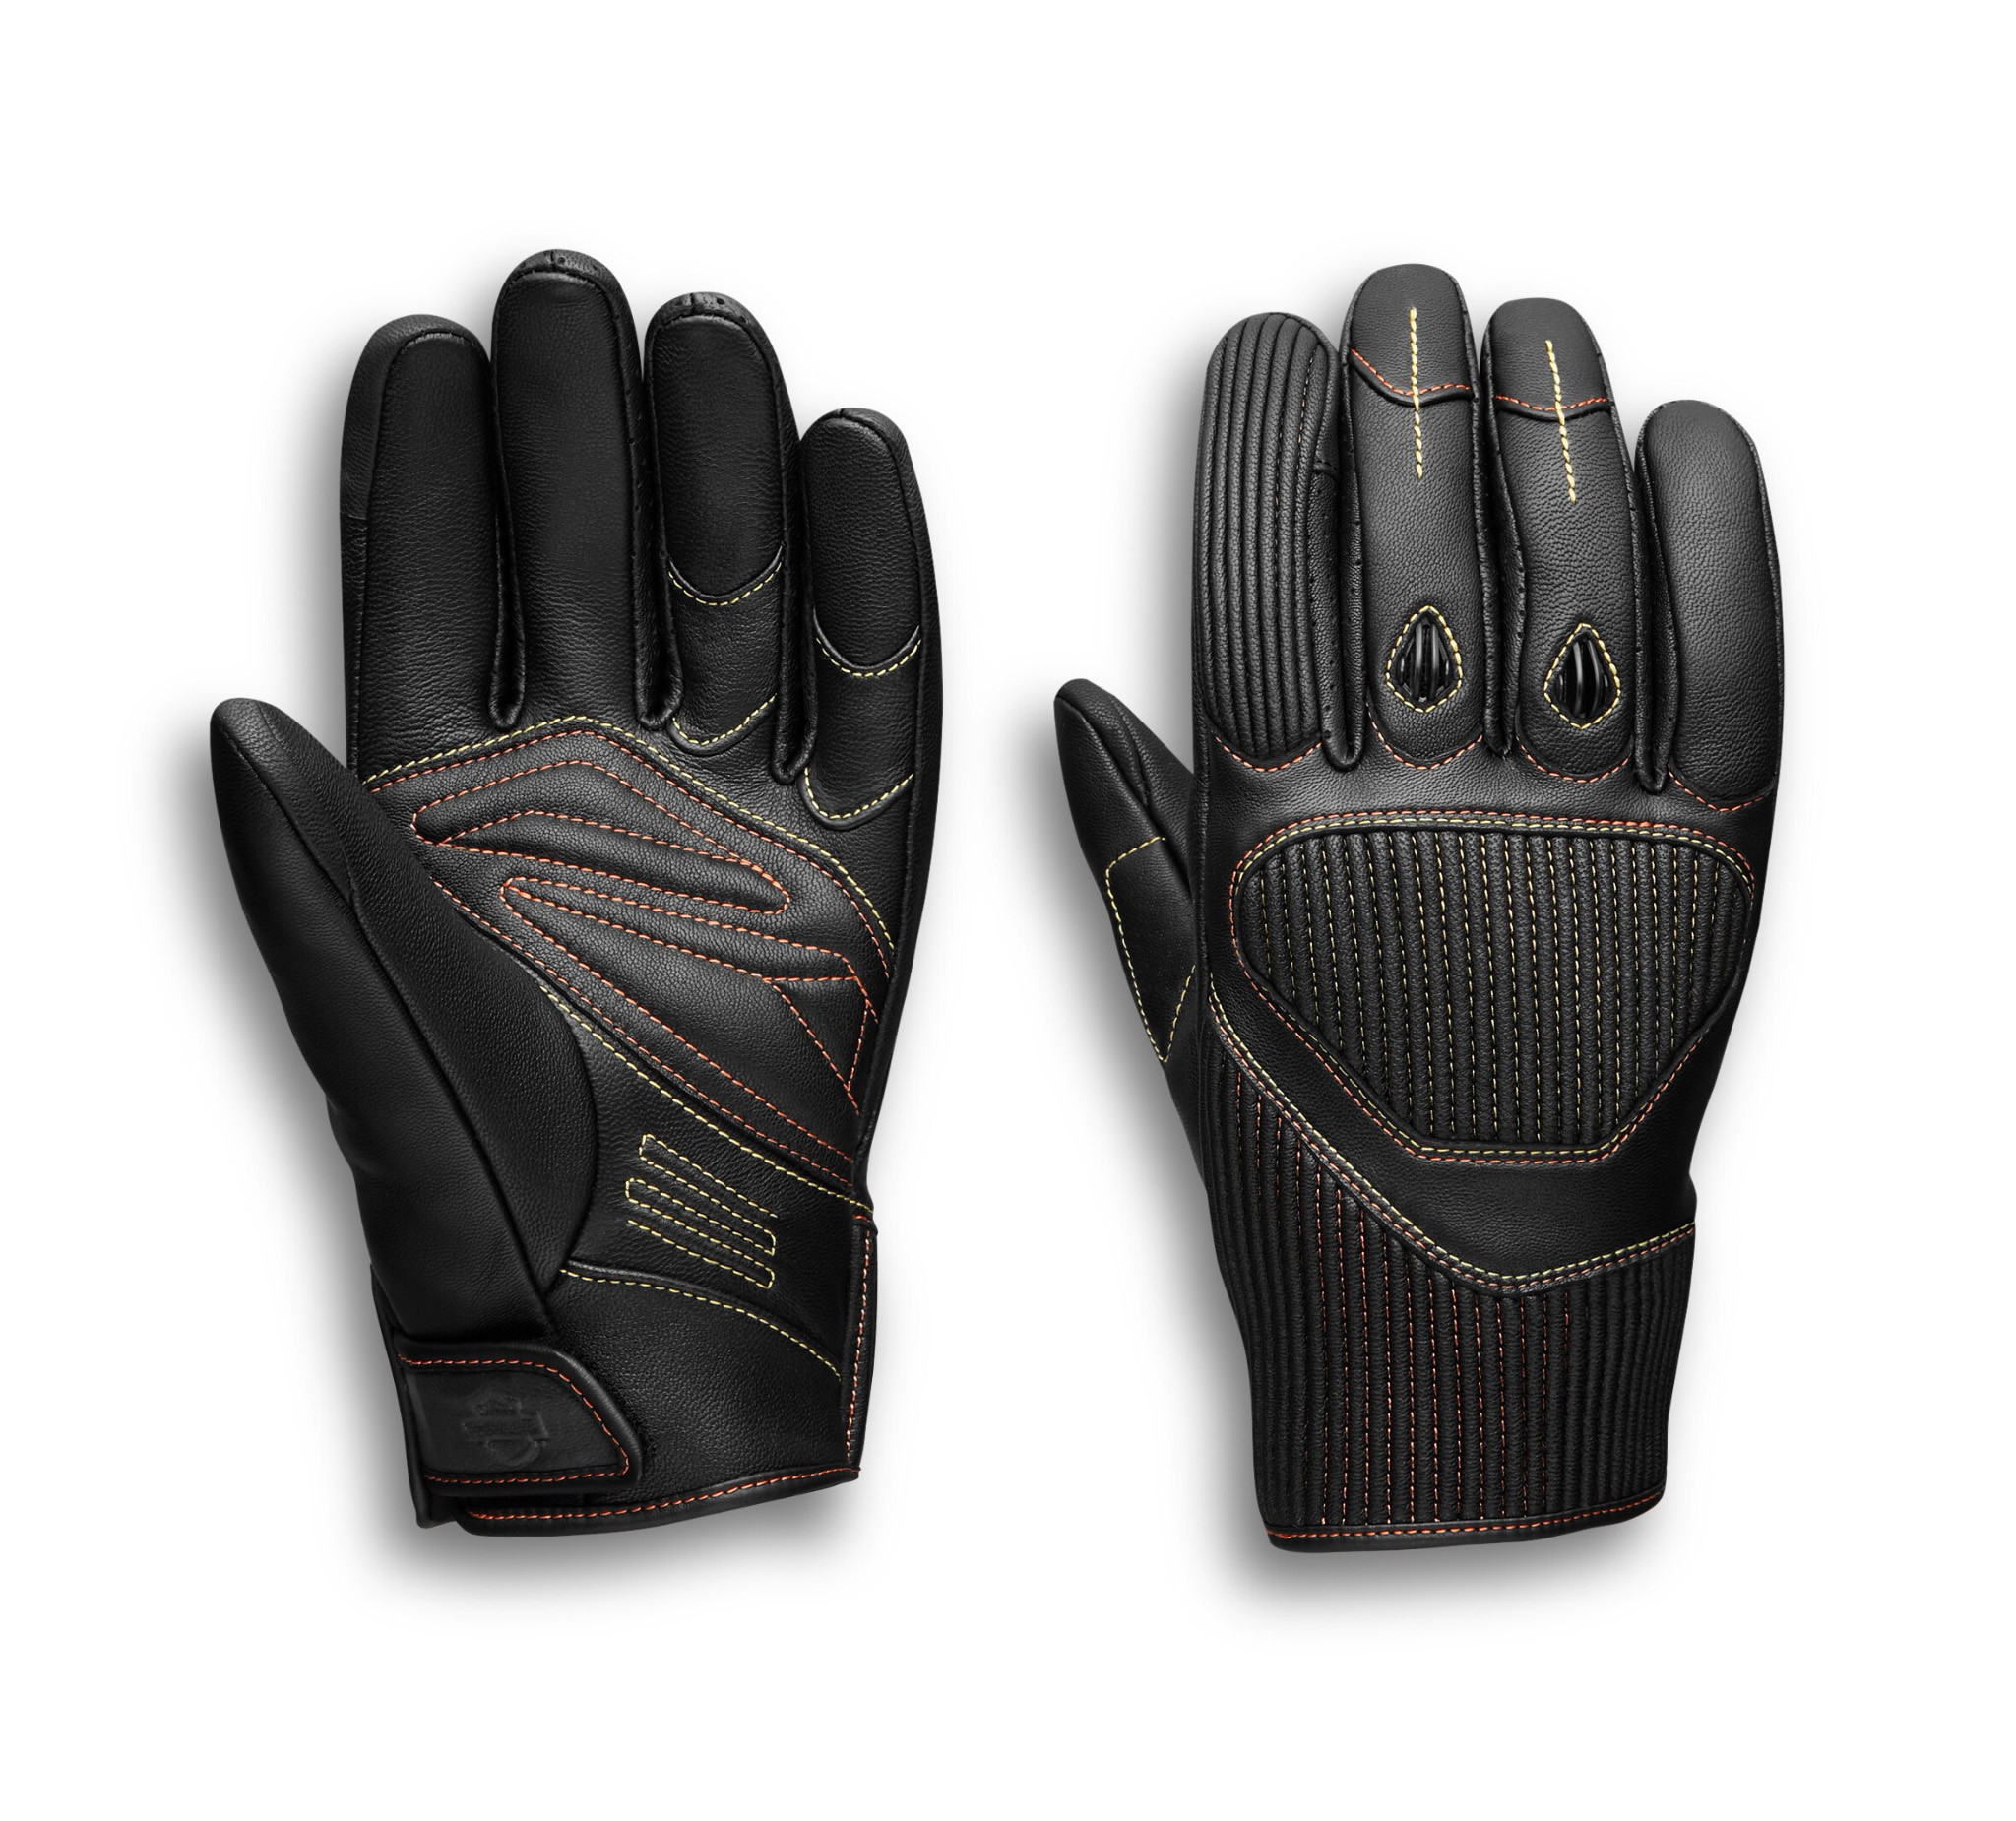 BRAND NEW HALF FINGER ORIGINAL LEATHER GLOVES SIZES S TO 3XL.